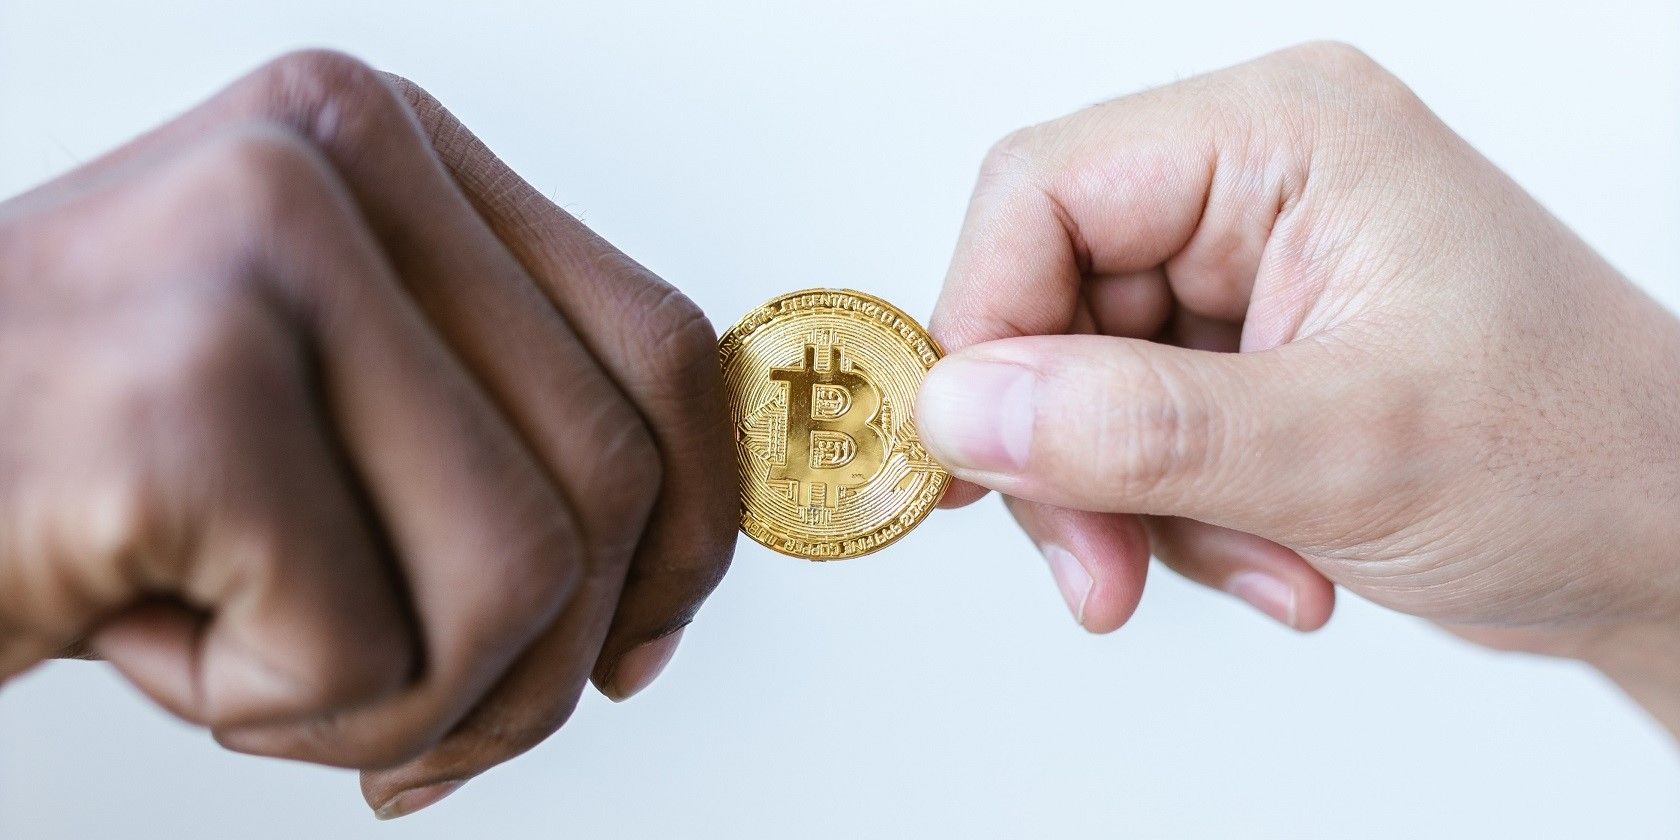 Close-Up Shot of Two People Holding a Bitcoin